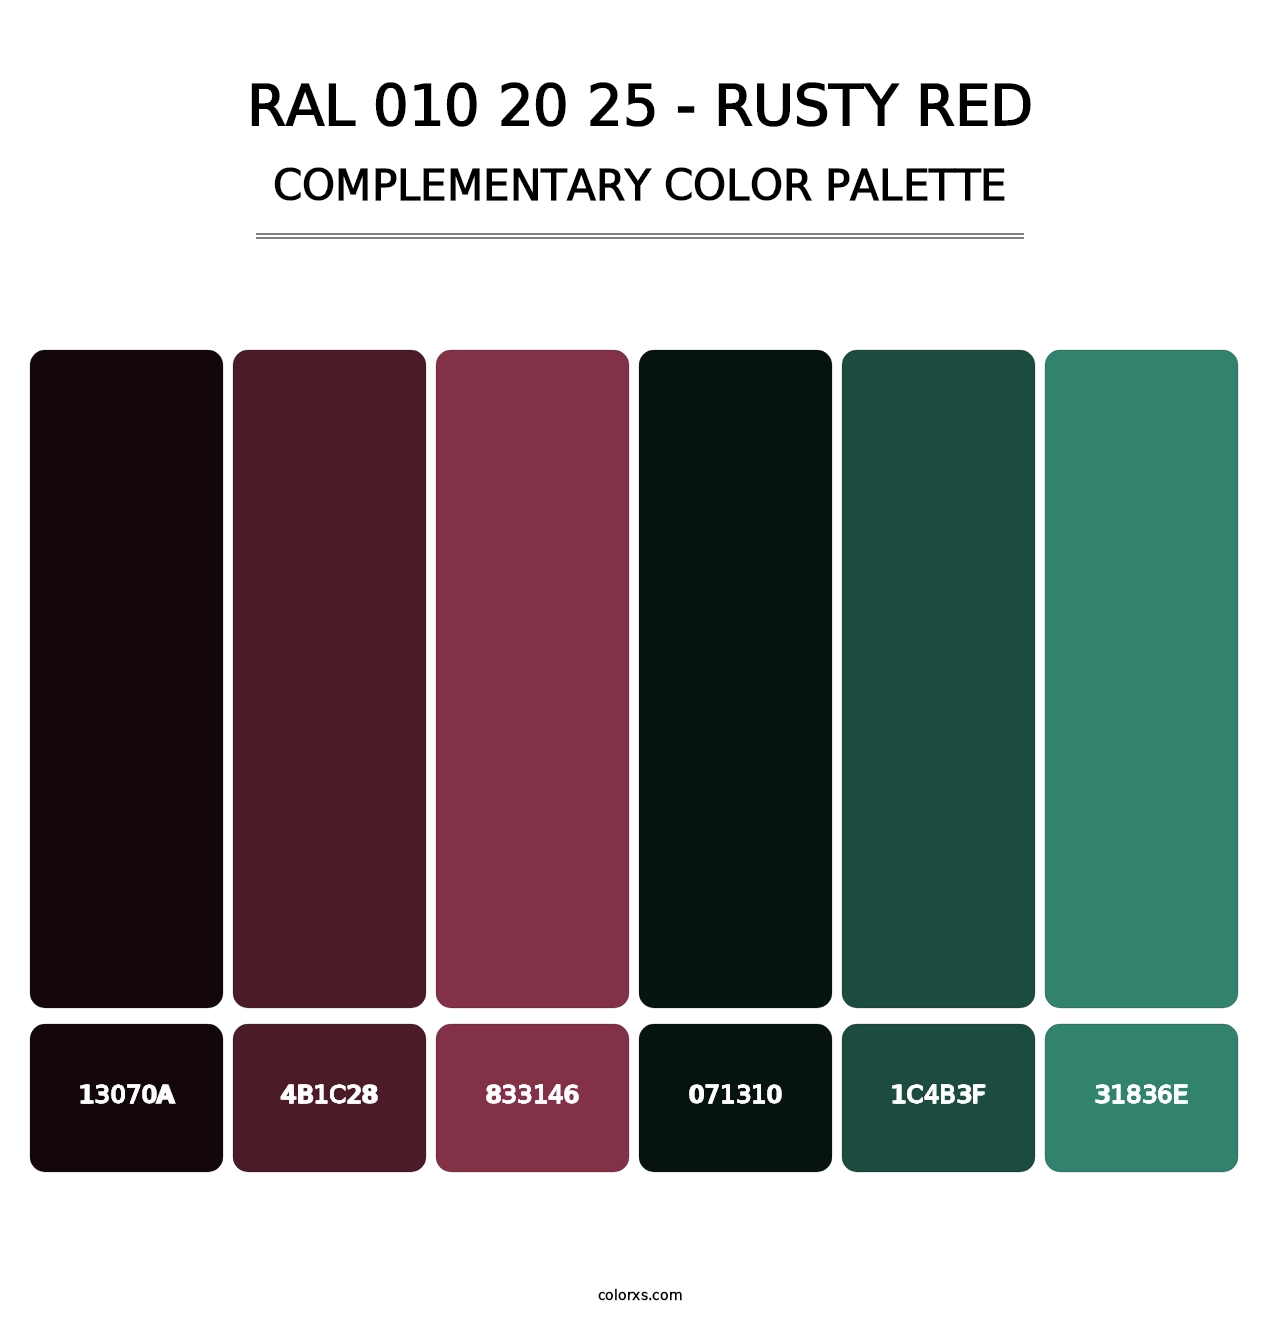 RAL 010 20 25 - Rusty Red - Complementary Color Palette